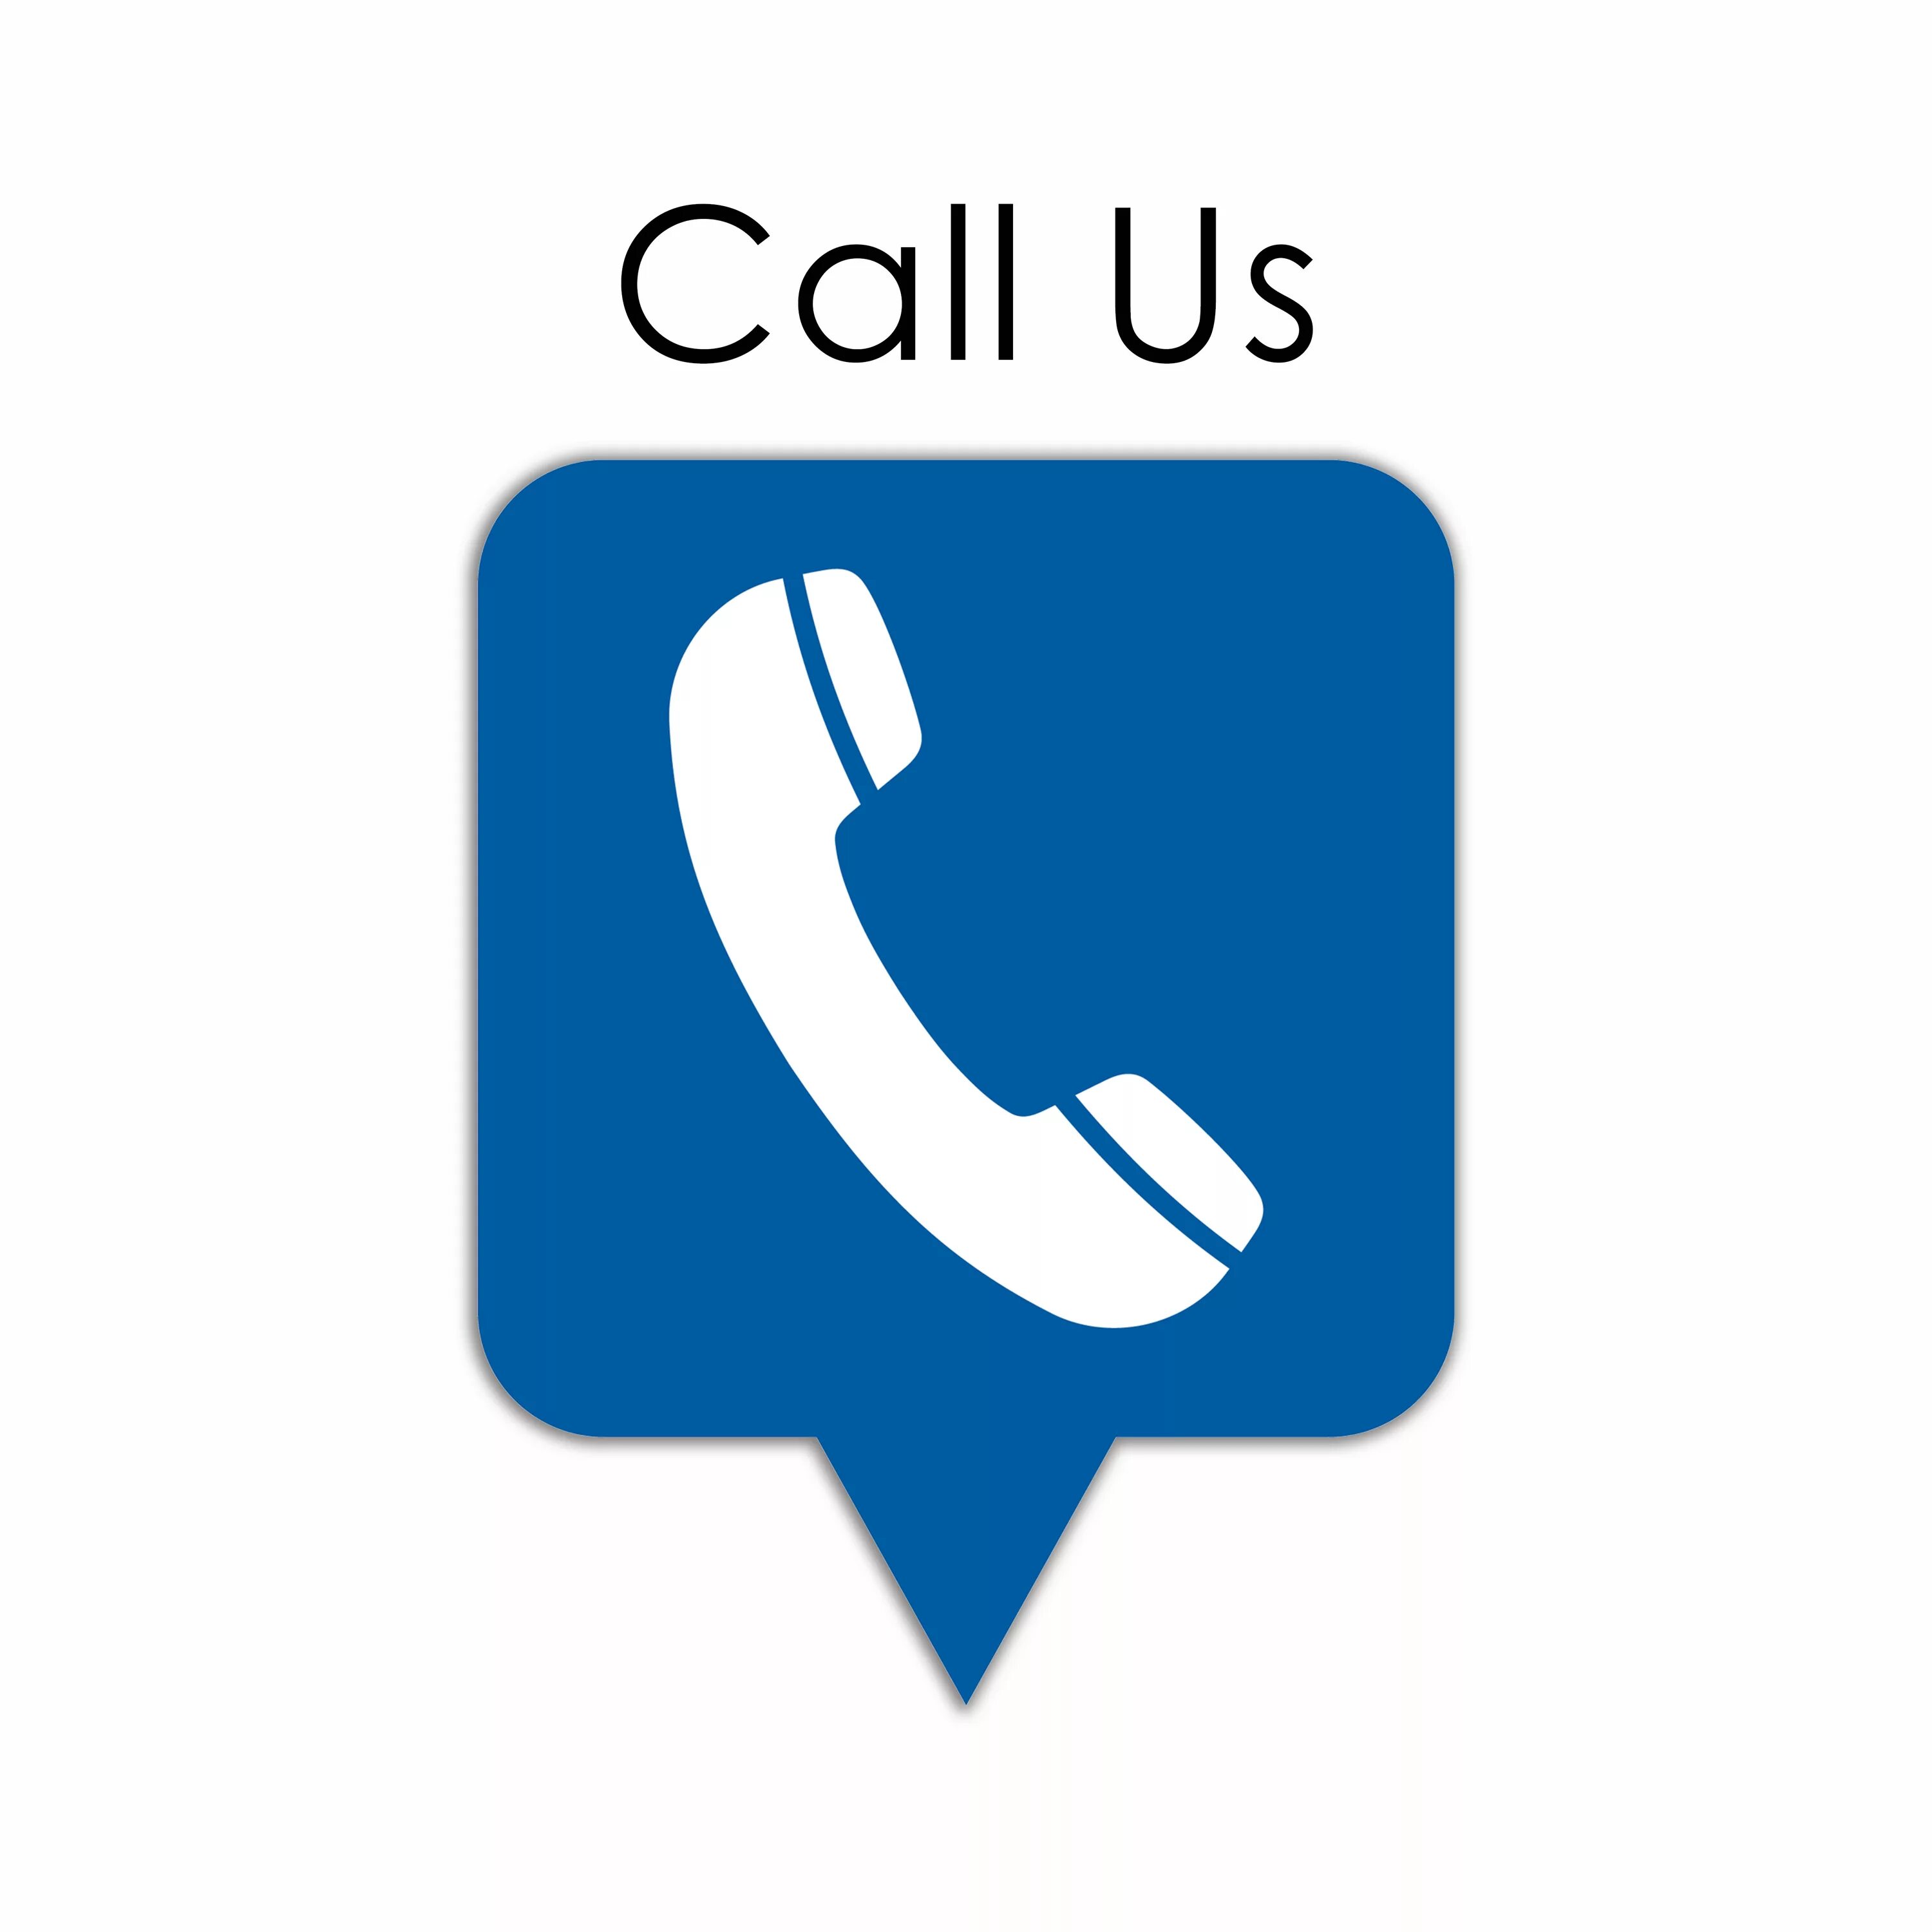 Call us. Call us logo. Call us Forgotten logo. Call us today for a logo. Call us now